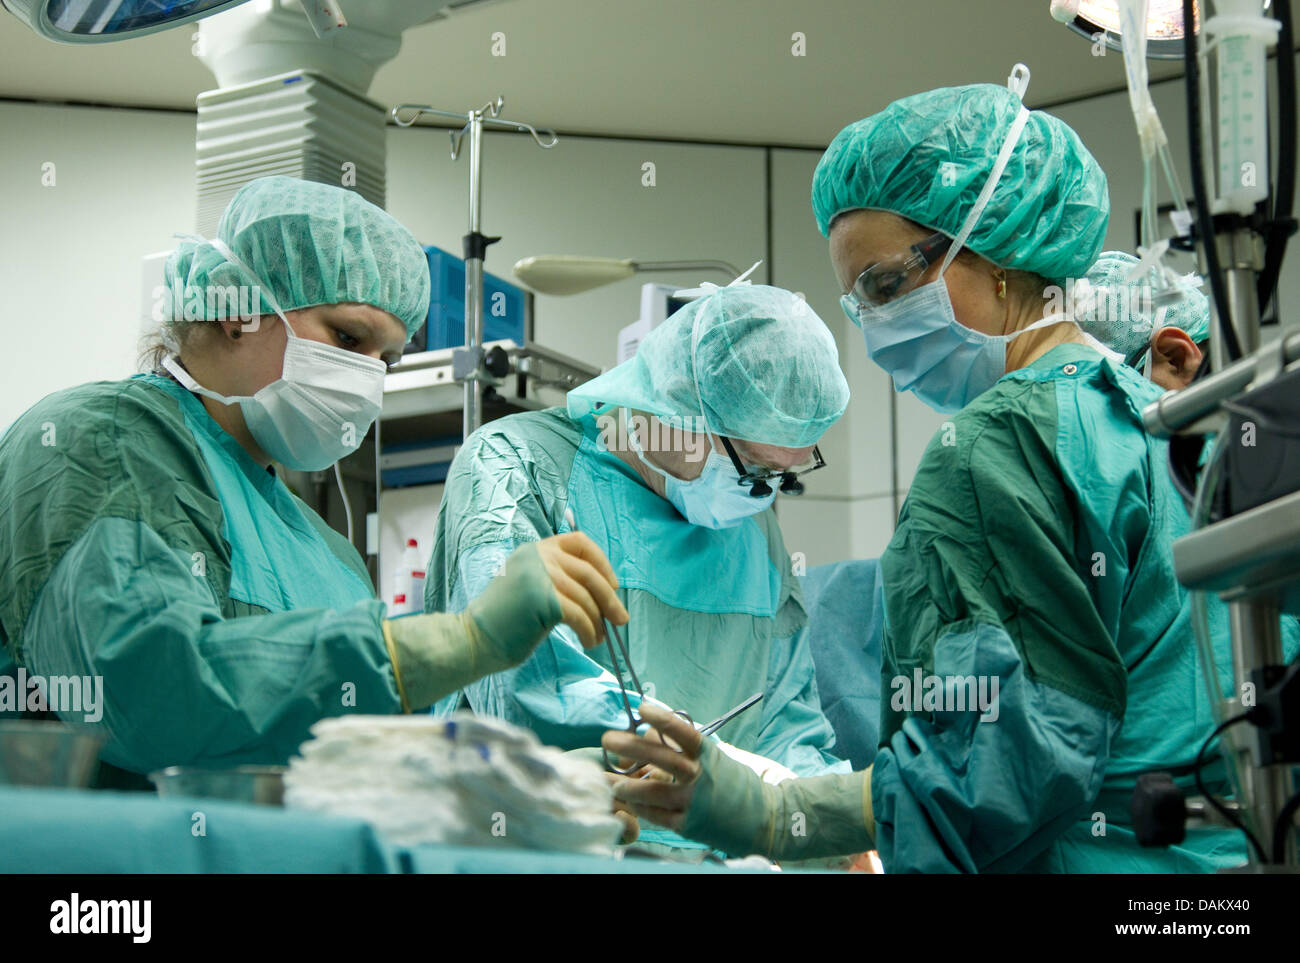 A surgical team performs a heart surgery at the Schuechtermann clinic in Bad Rothenfelde, Germany, 4 May 2011. The hospital specialized on heart disease and angiopathy. Photo: Friso Gentsch Stock Photo